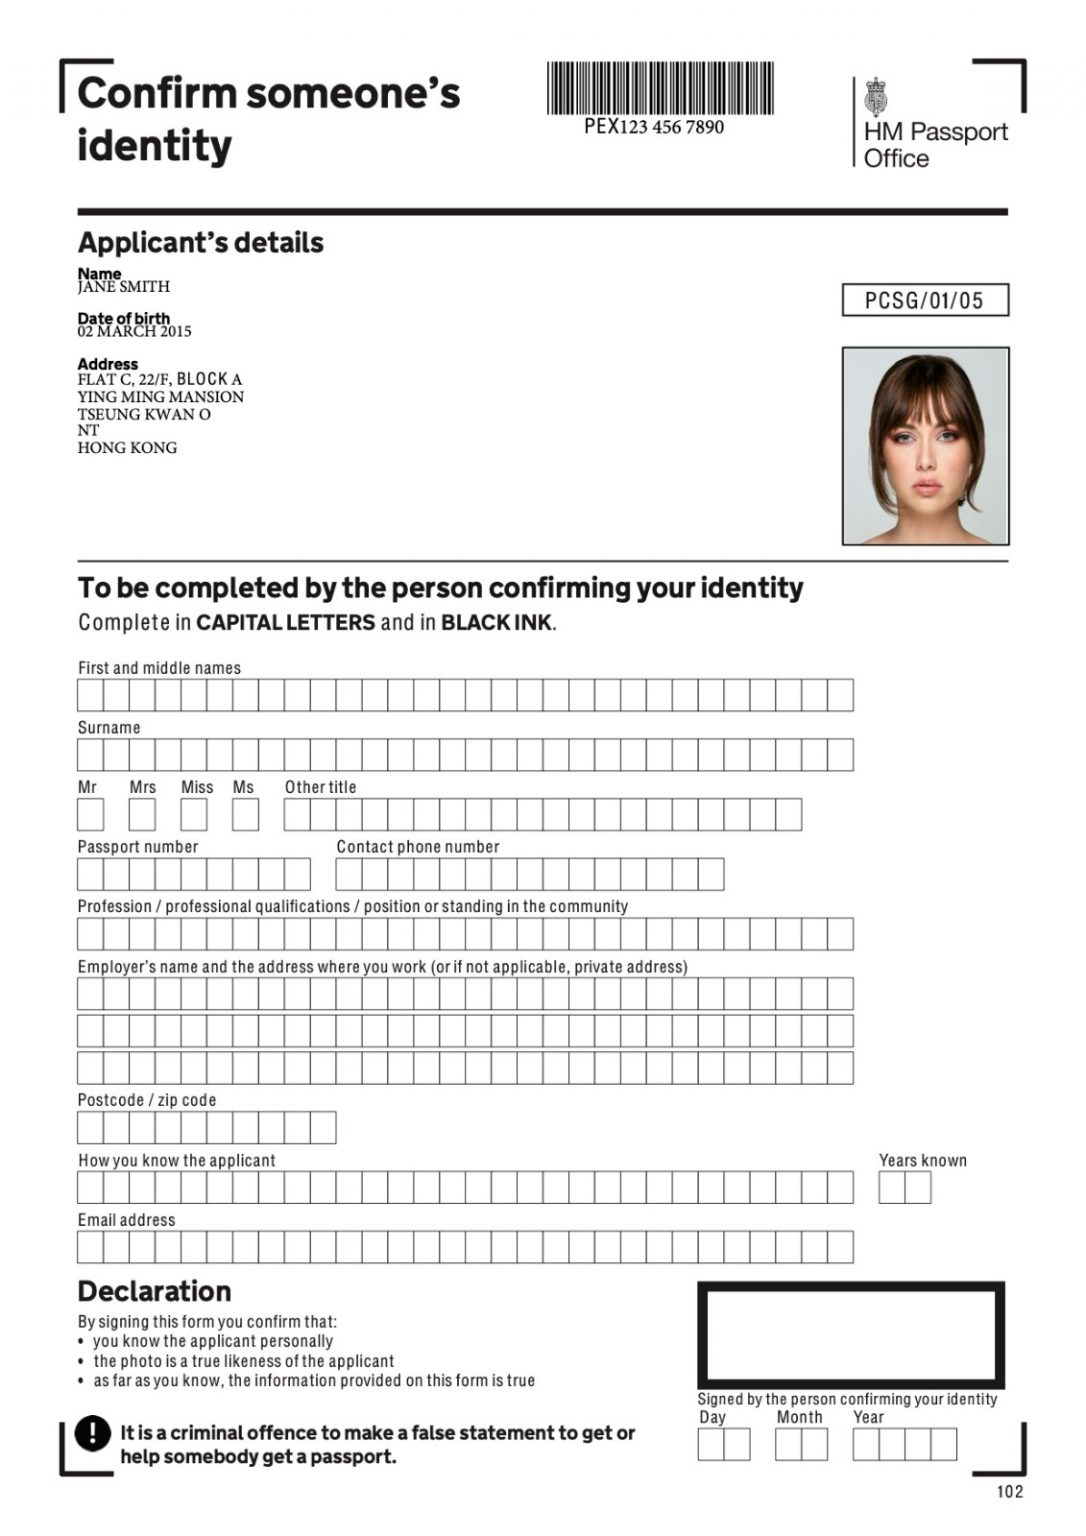 Your Guide To British Passport Application Countersigning 